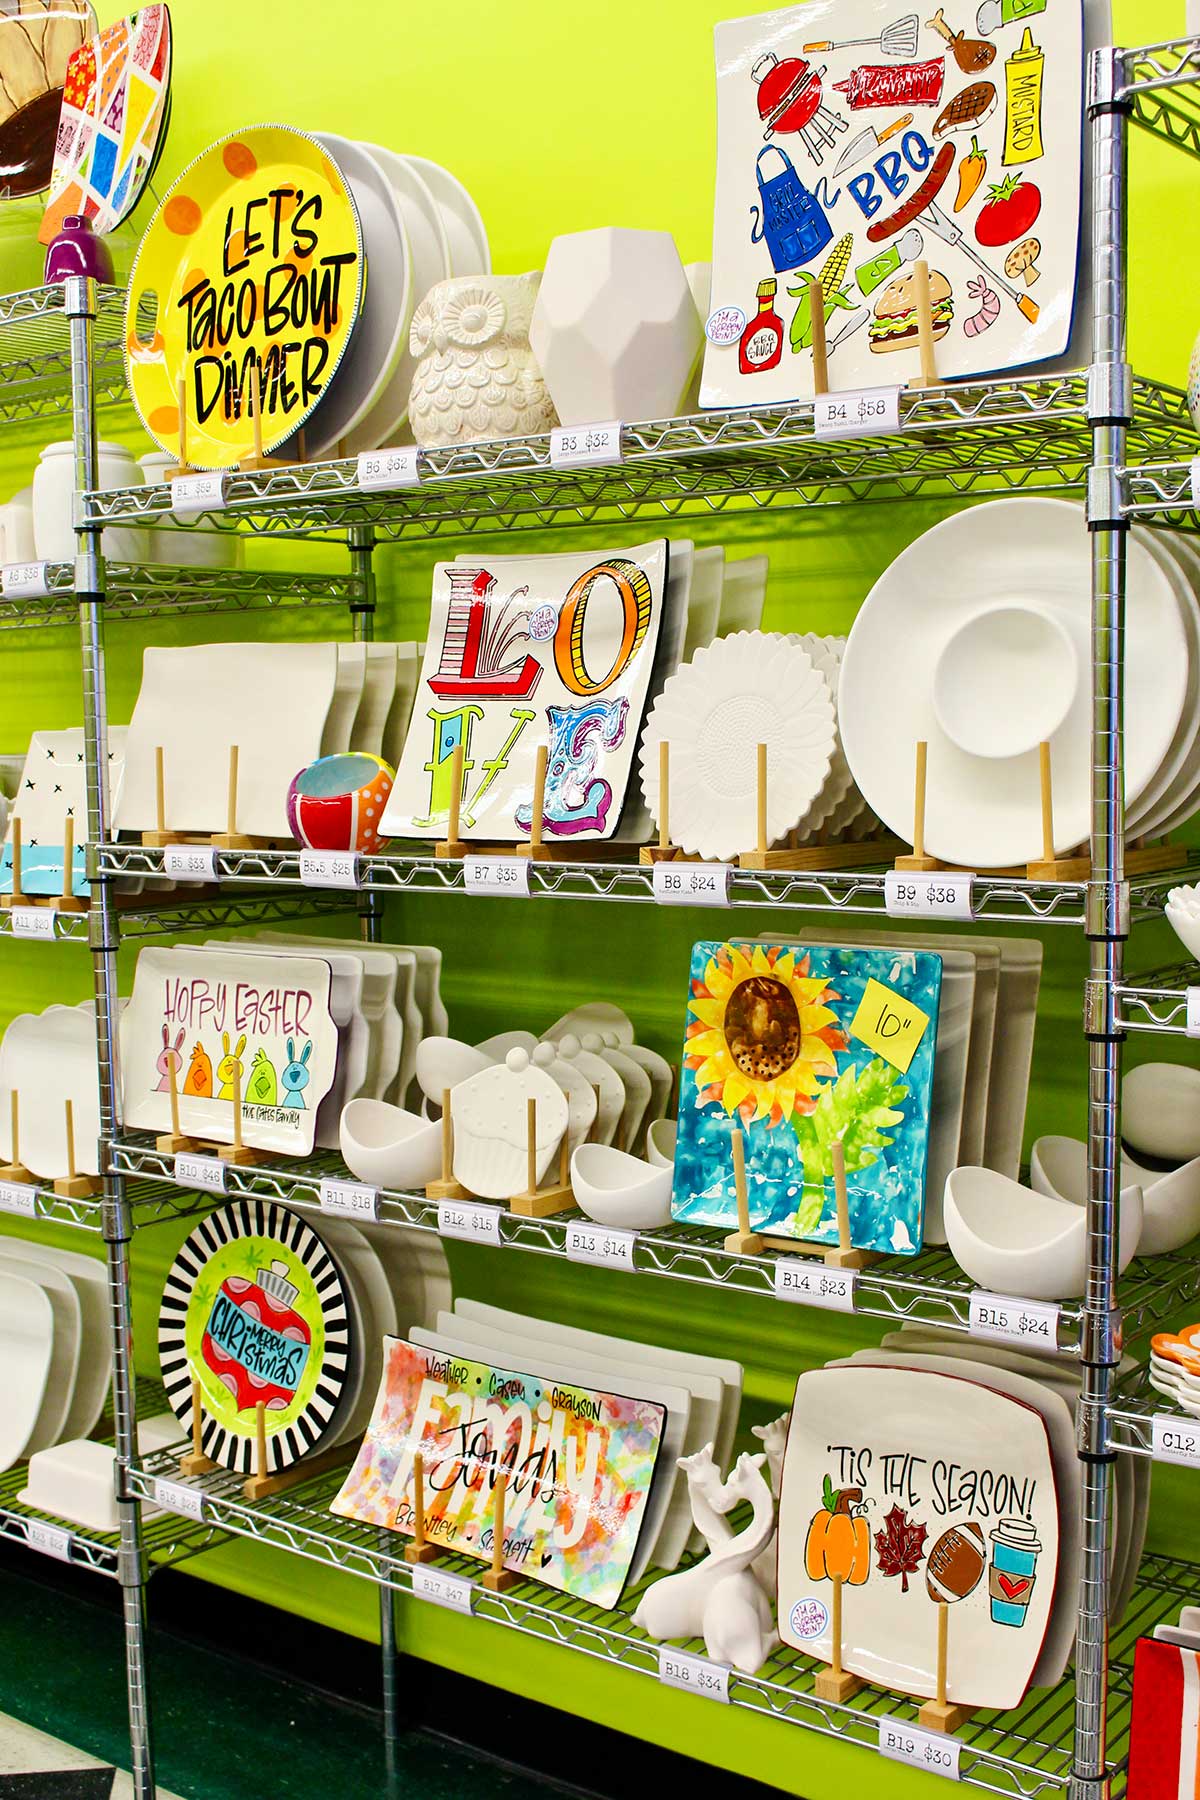 A display of larger plate options on metal rack at ceramic painting studio.